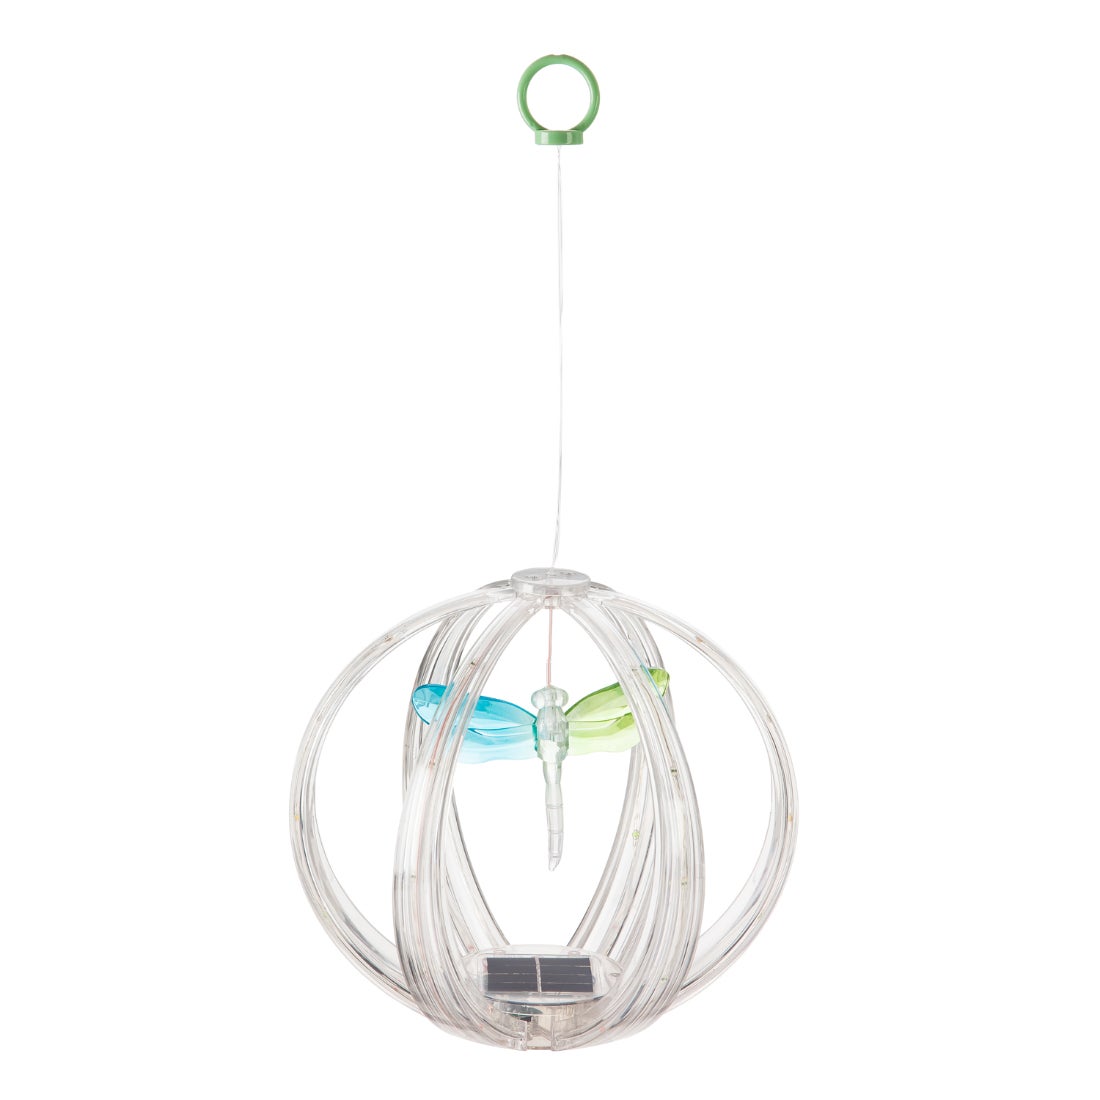 Dragonfly Solar Mobile Sphere with Multicolor Chasing Light Display